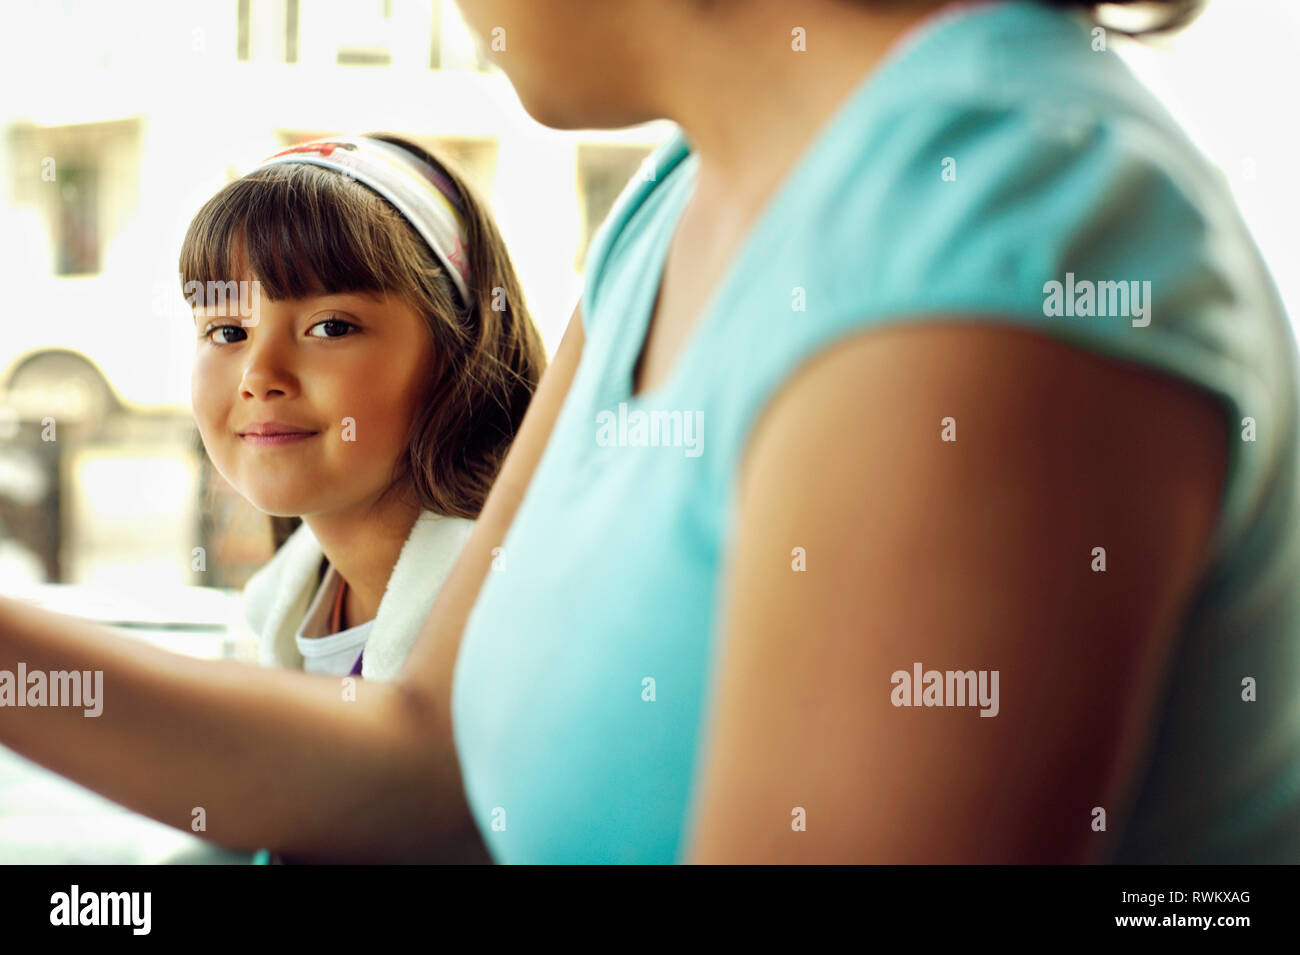 Young girl wearing a headband smiles. Stock Photo